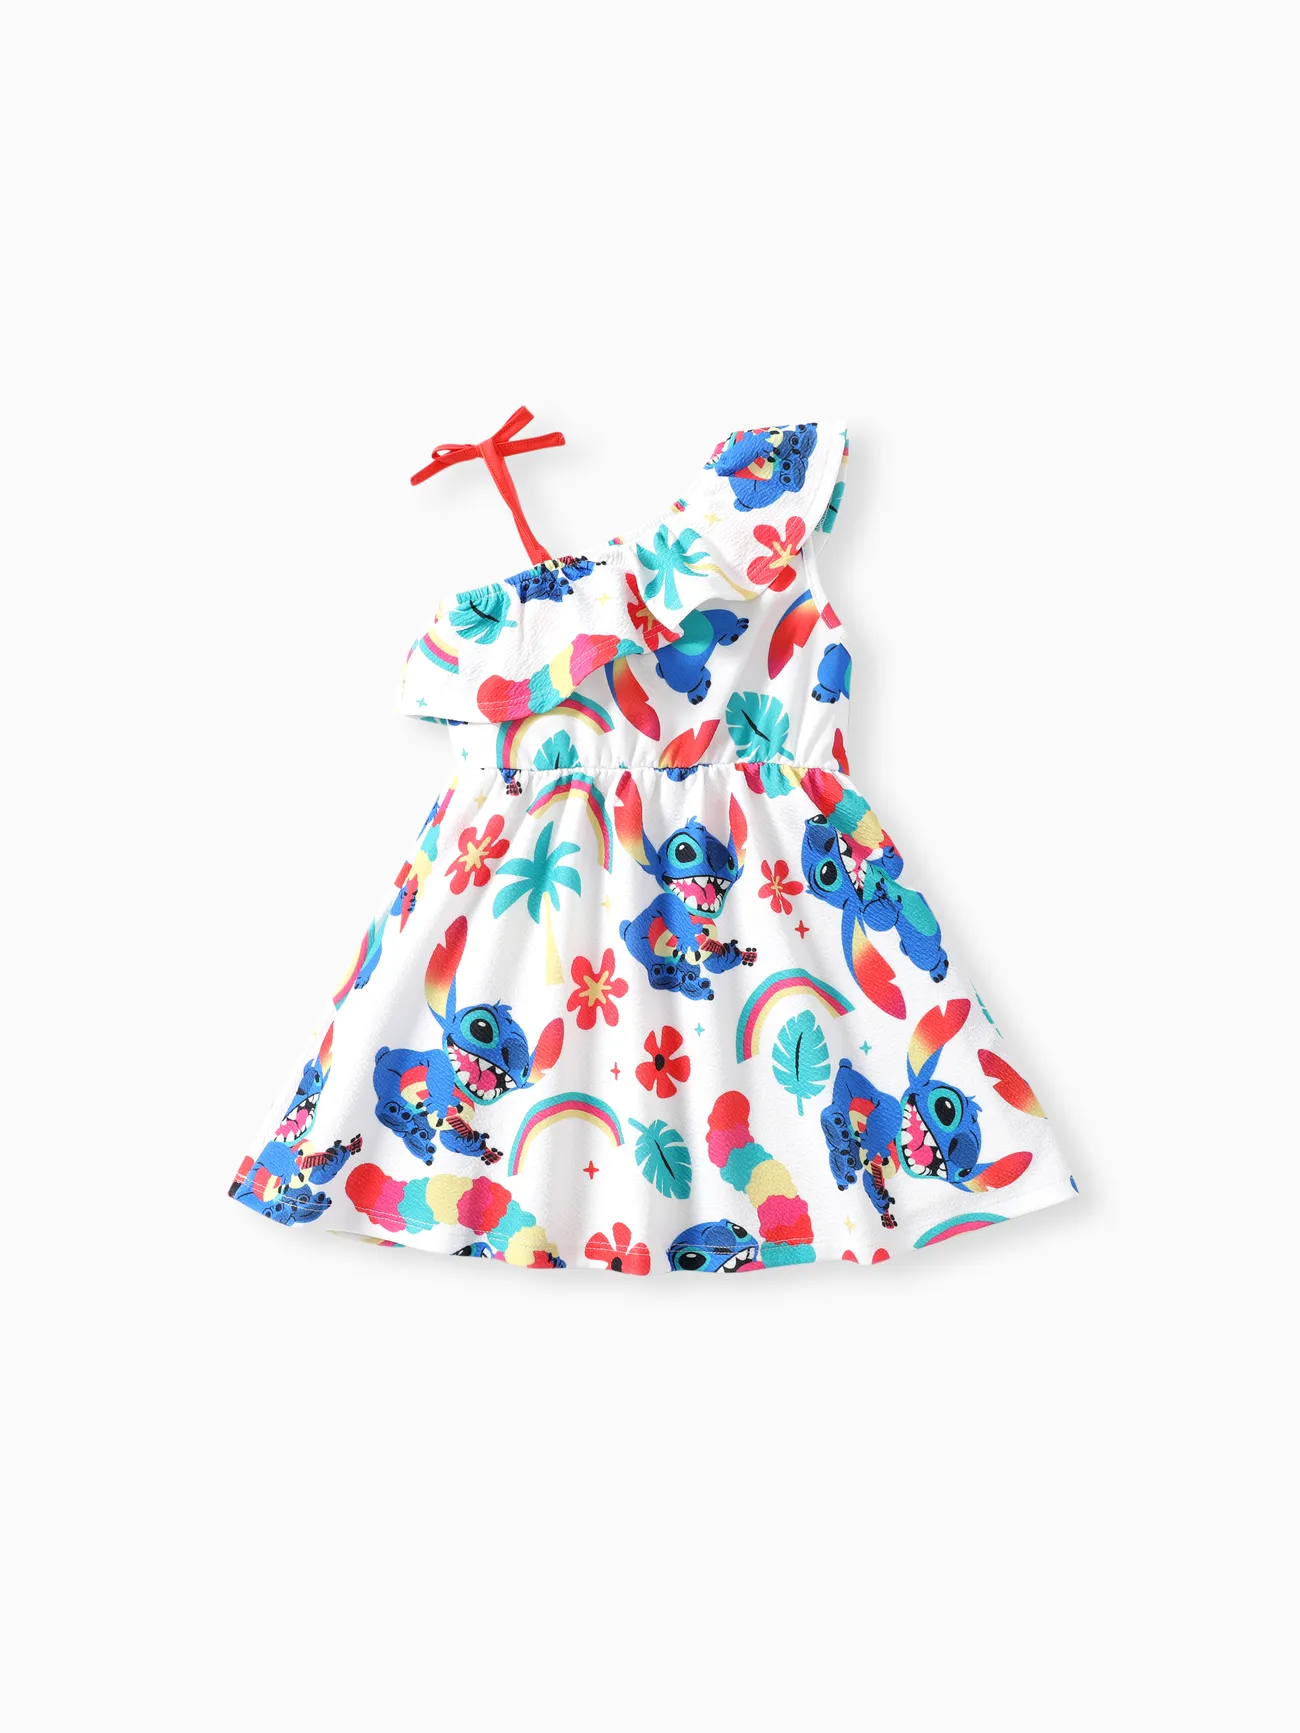 Disney Stitch Toddler Girls 1pc Character All-over Rainbow Floral Print One-shoulder Bow Dress White big image 1